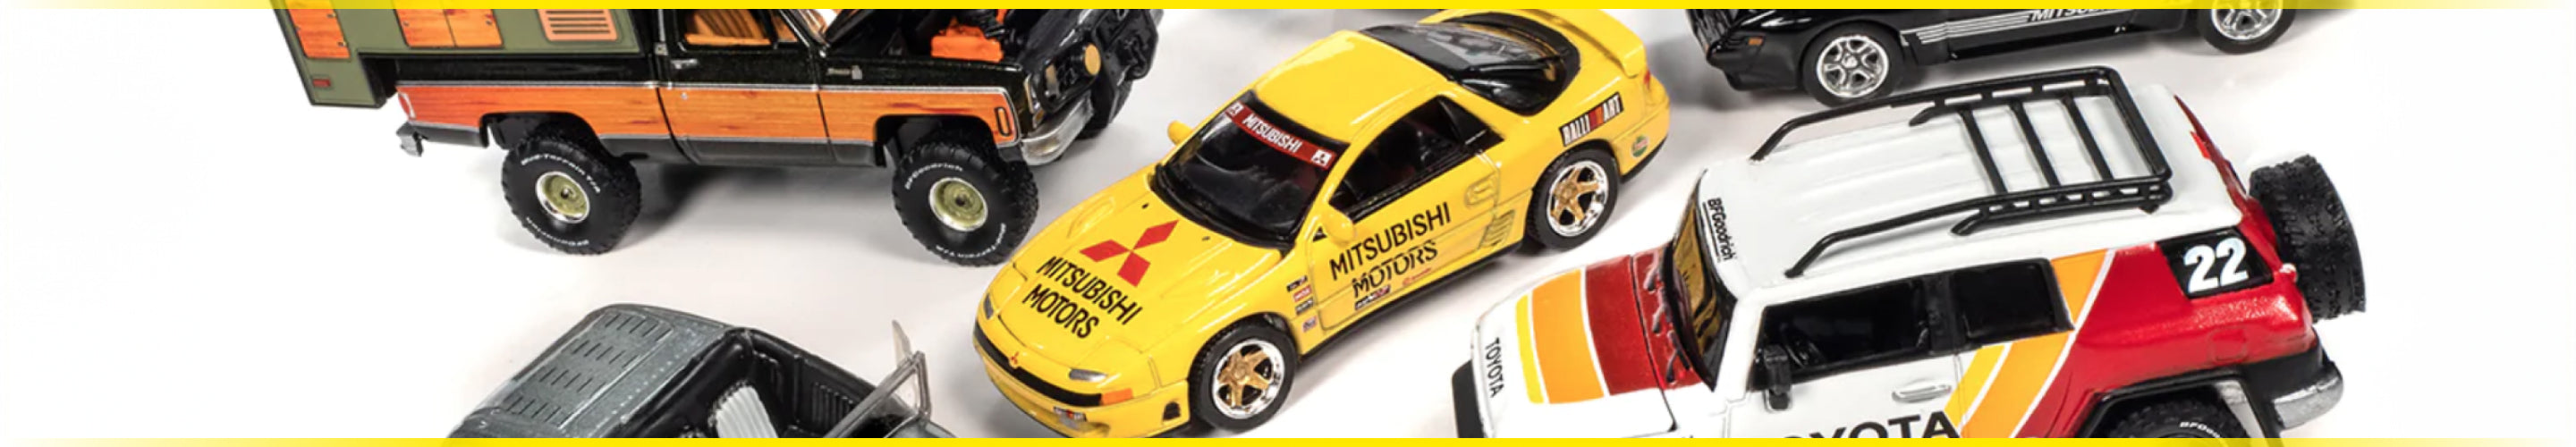 Revell Model Car Kits, Auto World Store, Order Today!